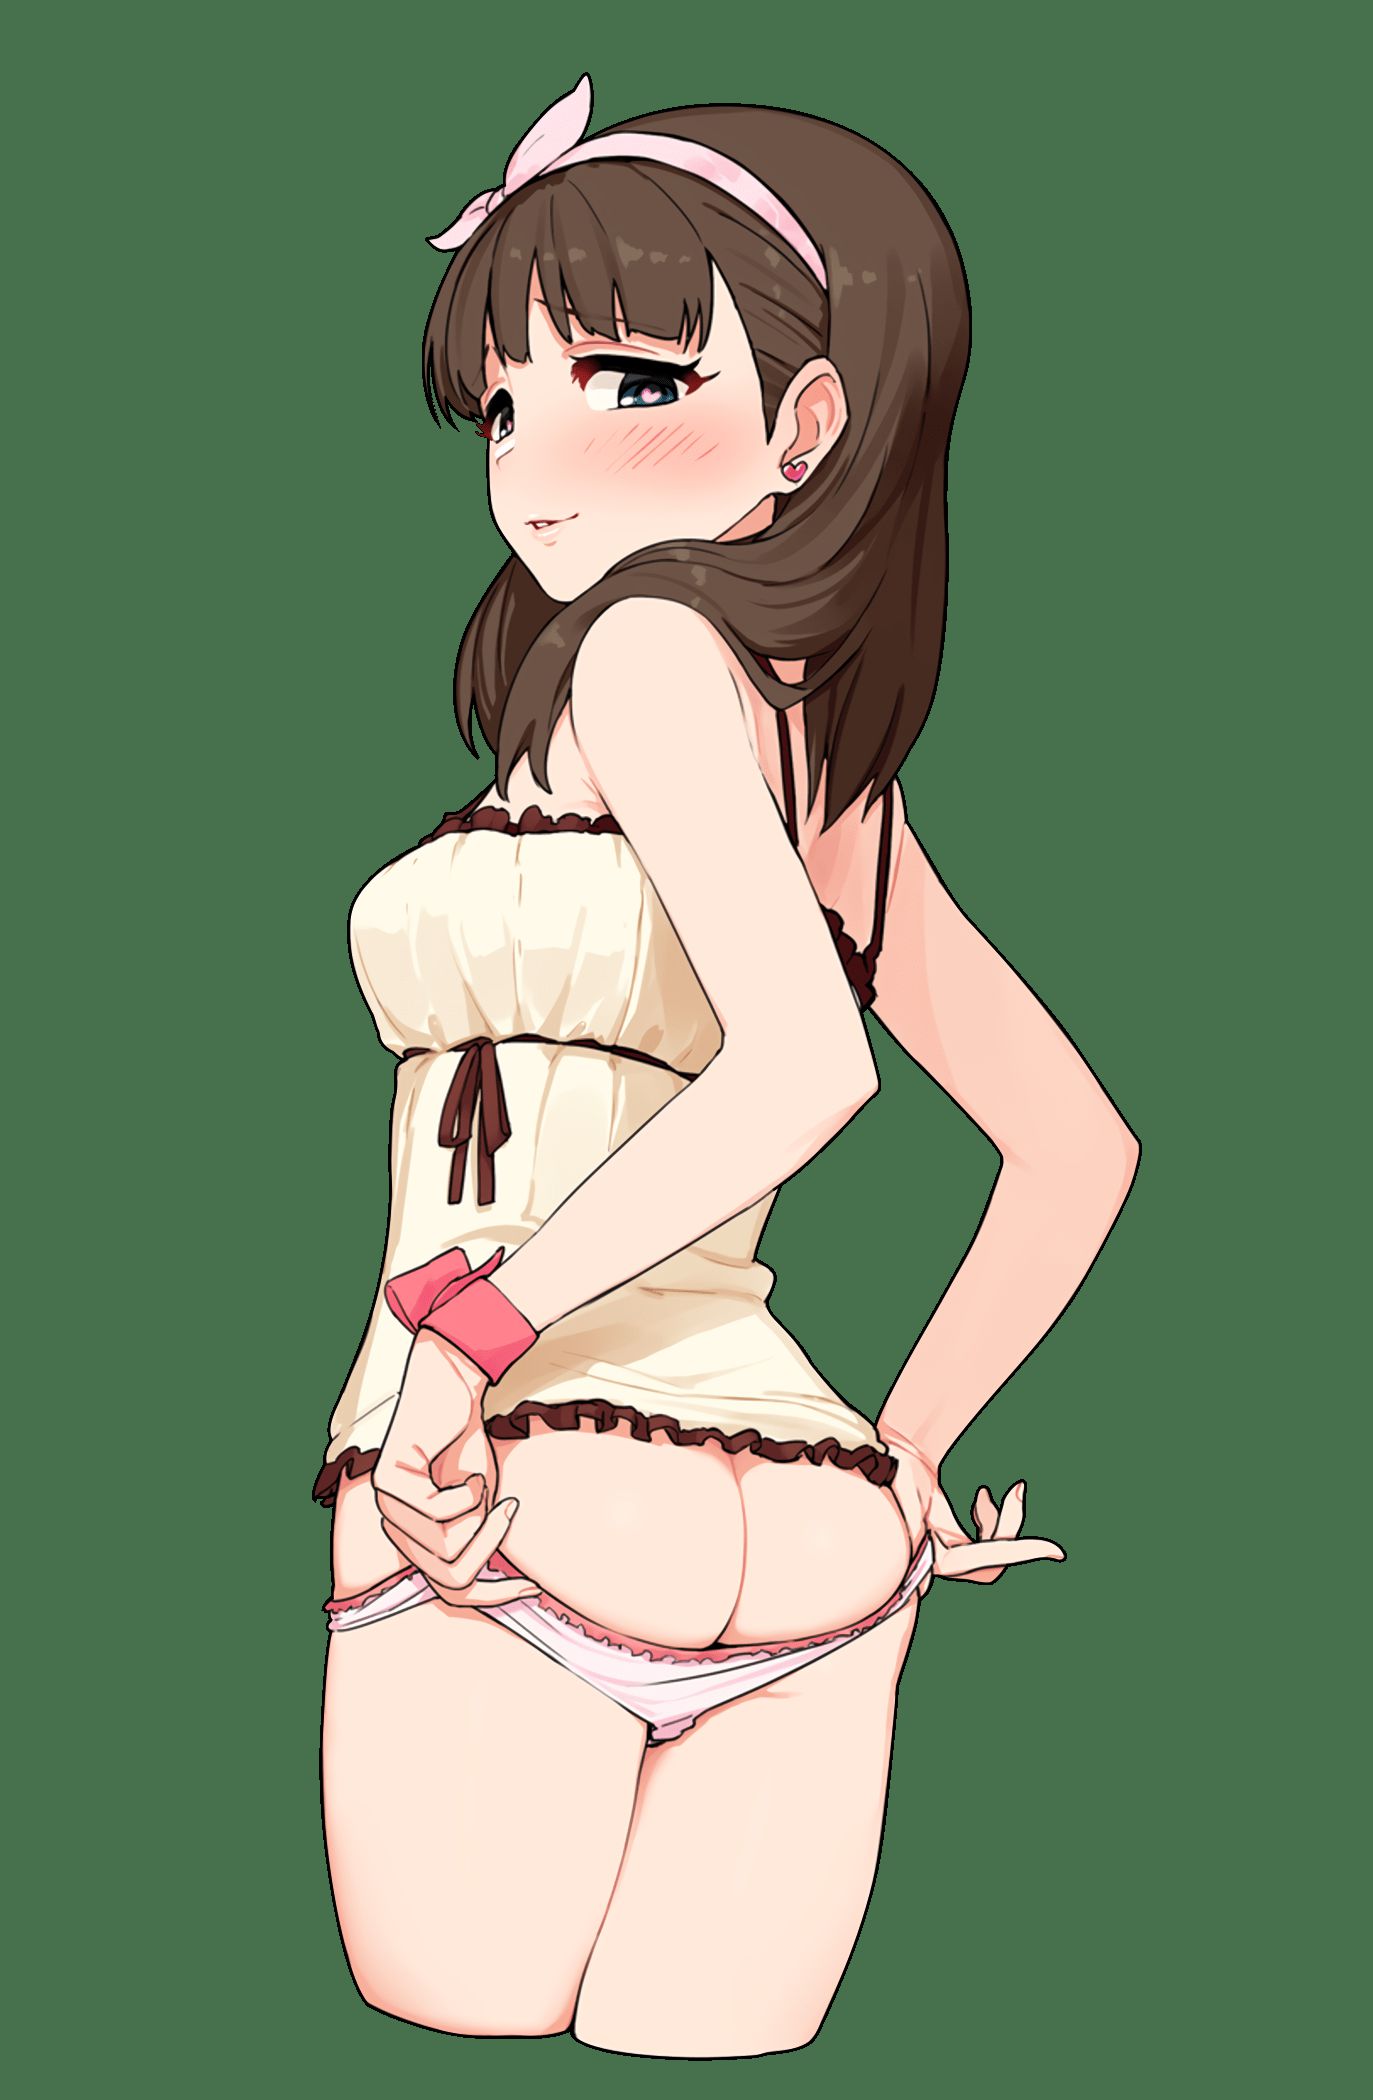 【Erocora Character Material】PNG background transparent erotic image such as anime characters Part 396 17